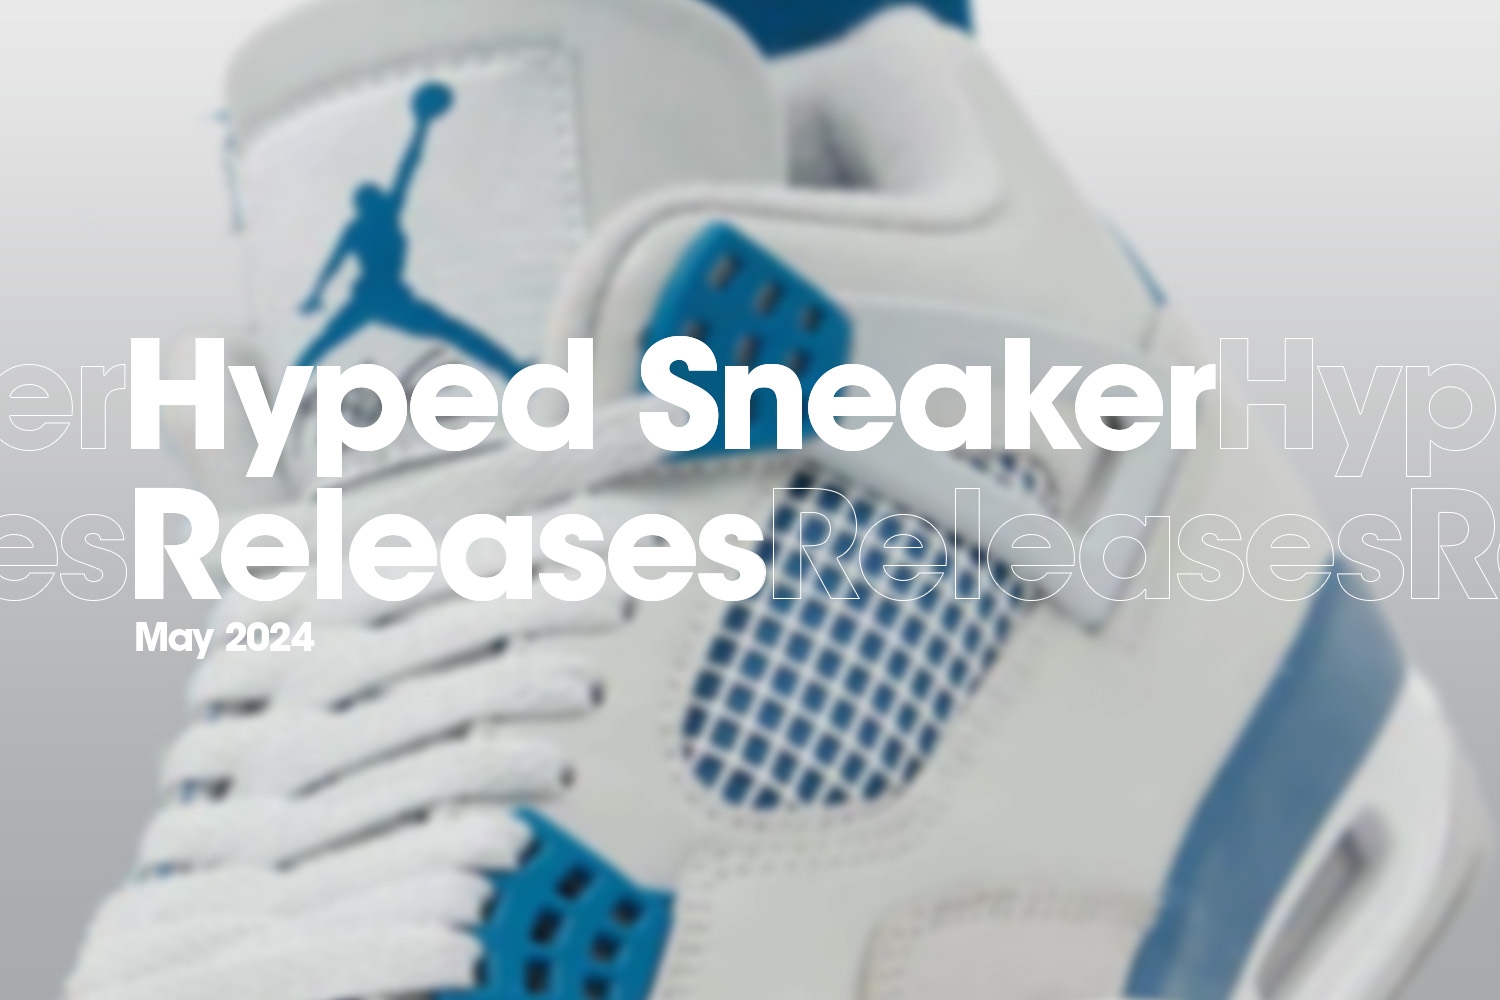 Hyped Sneaker Releases of May 2024